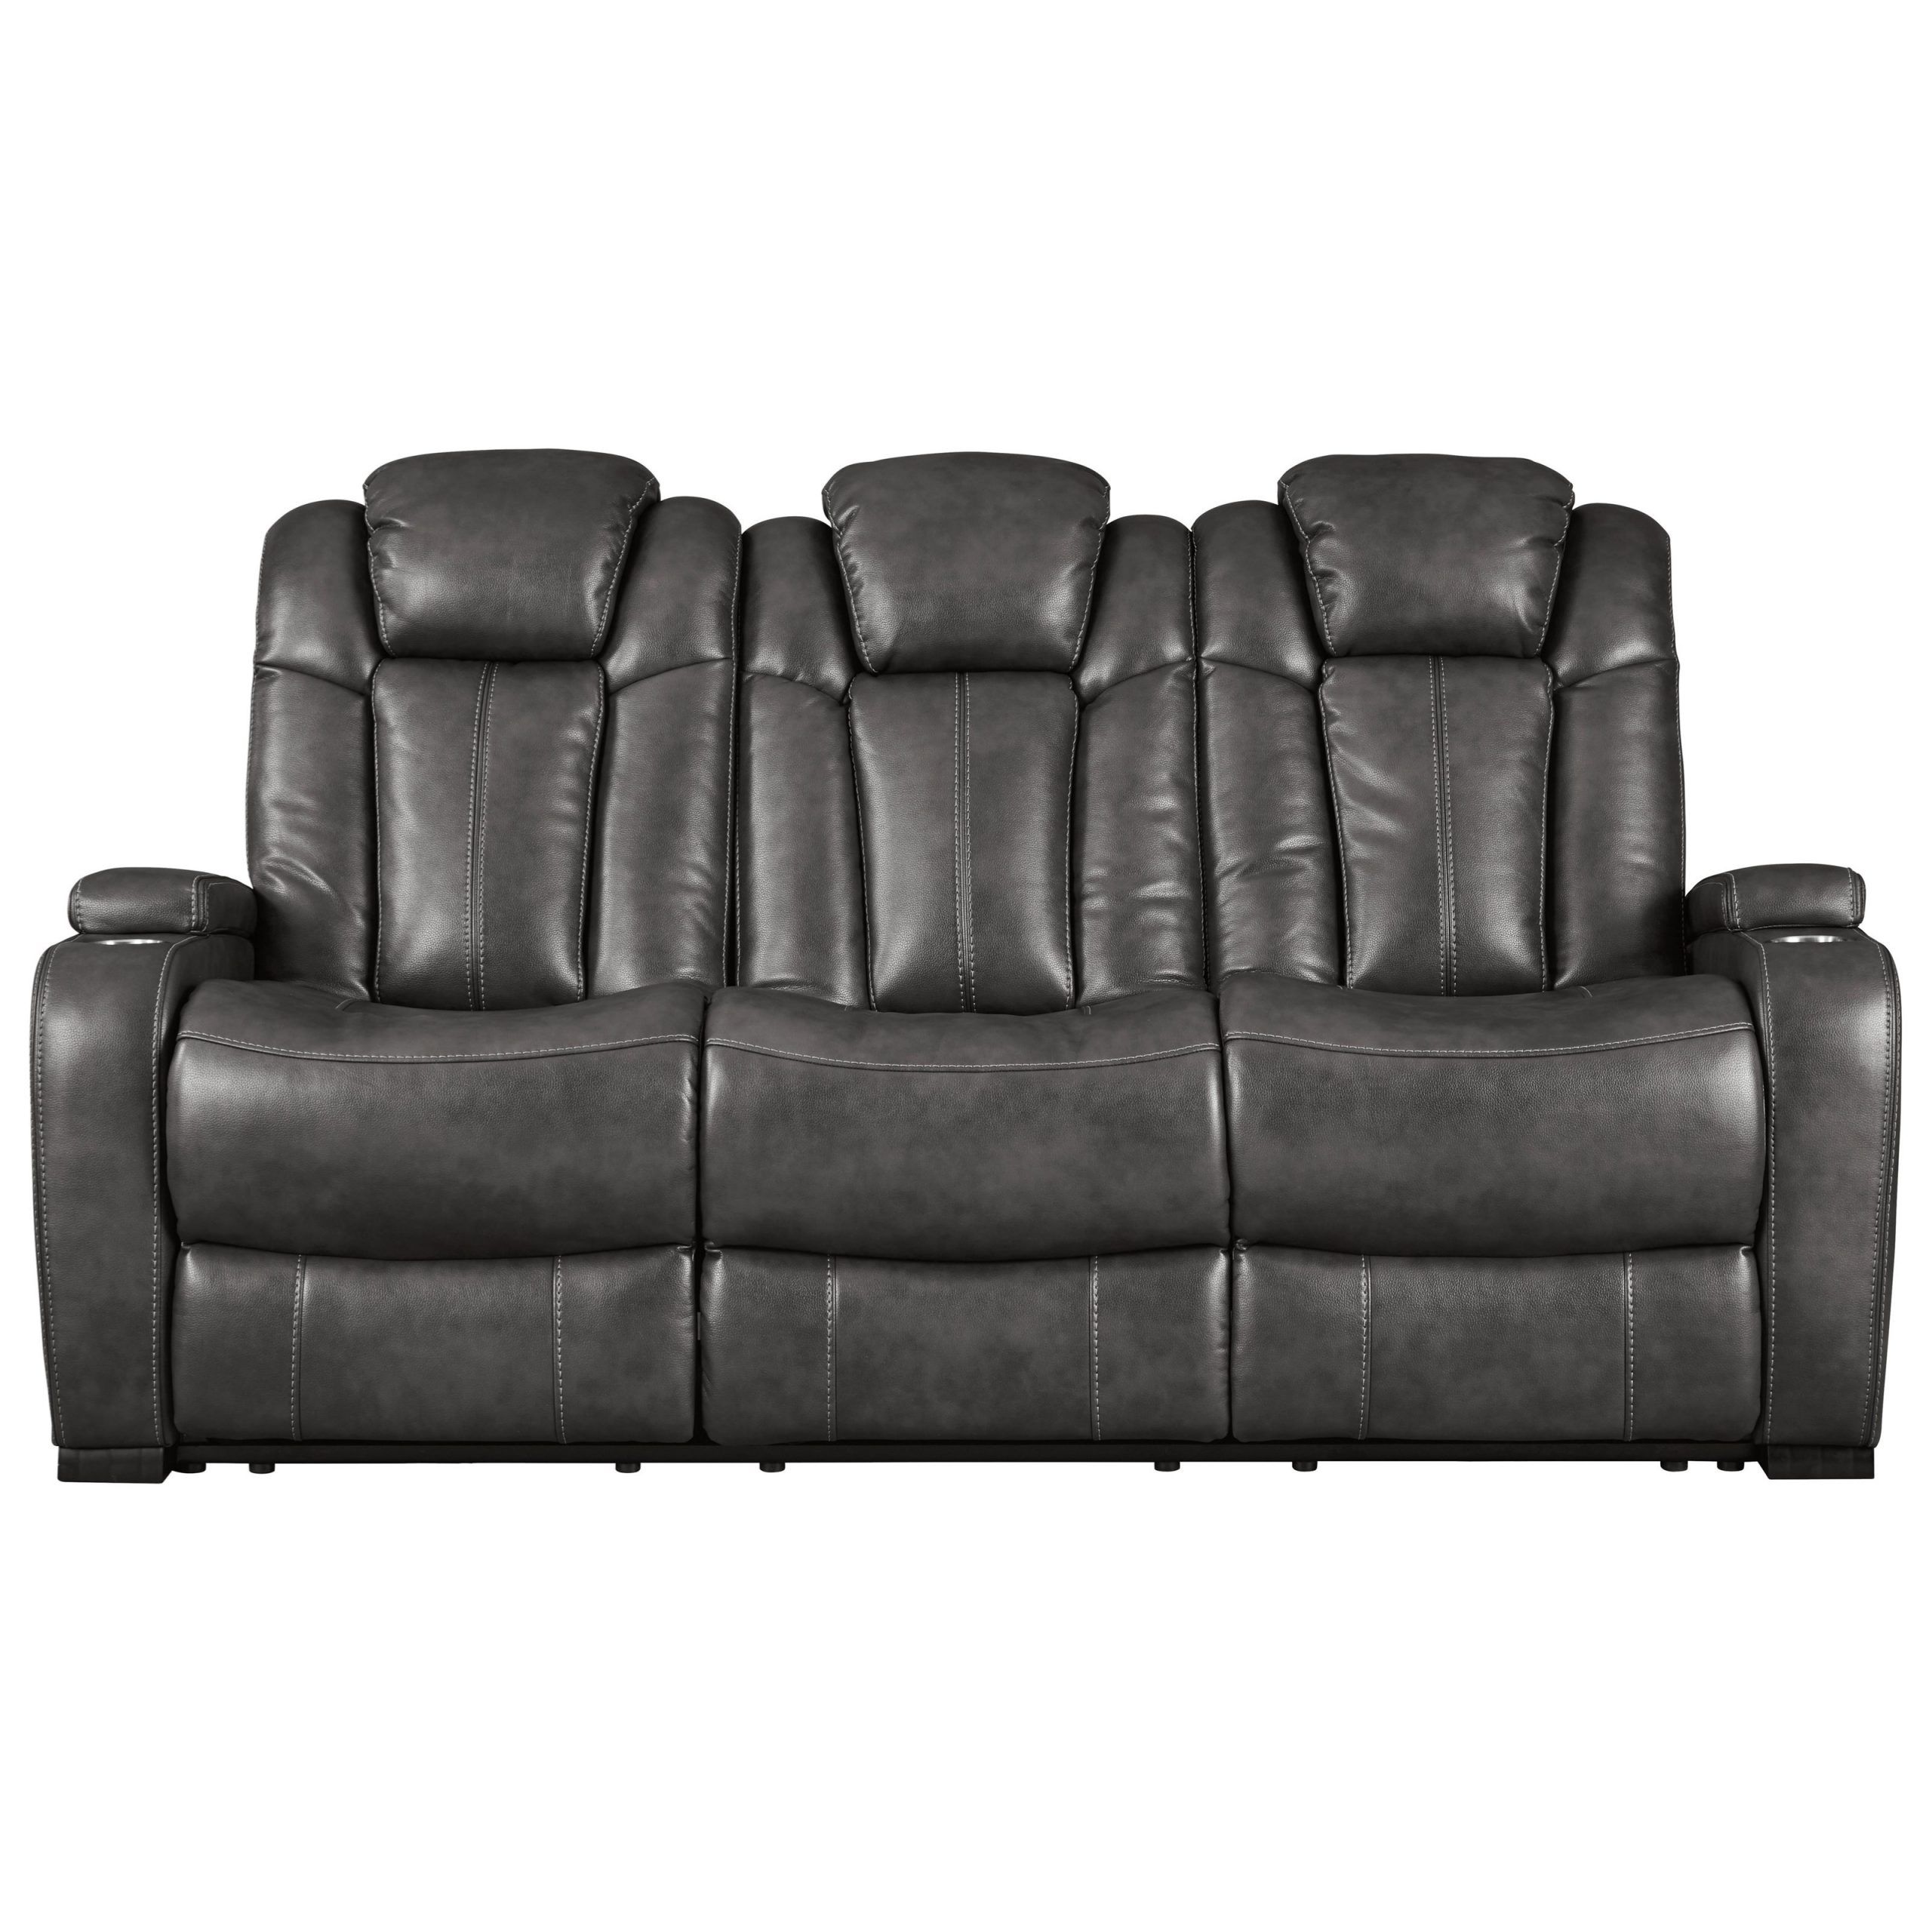 Power Reclining Sofas With Famous Signature Designashley Turbulance Contemporary Faux (View 1 of 20)